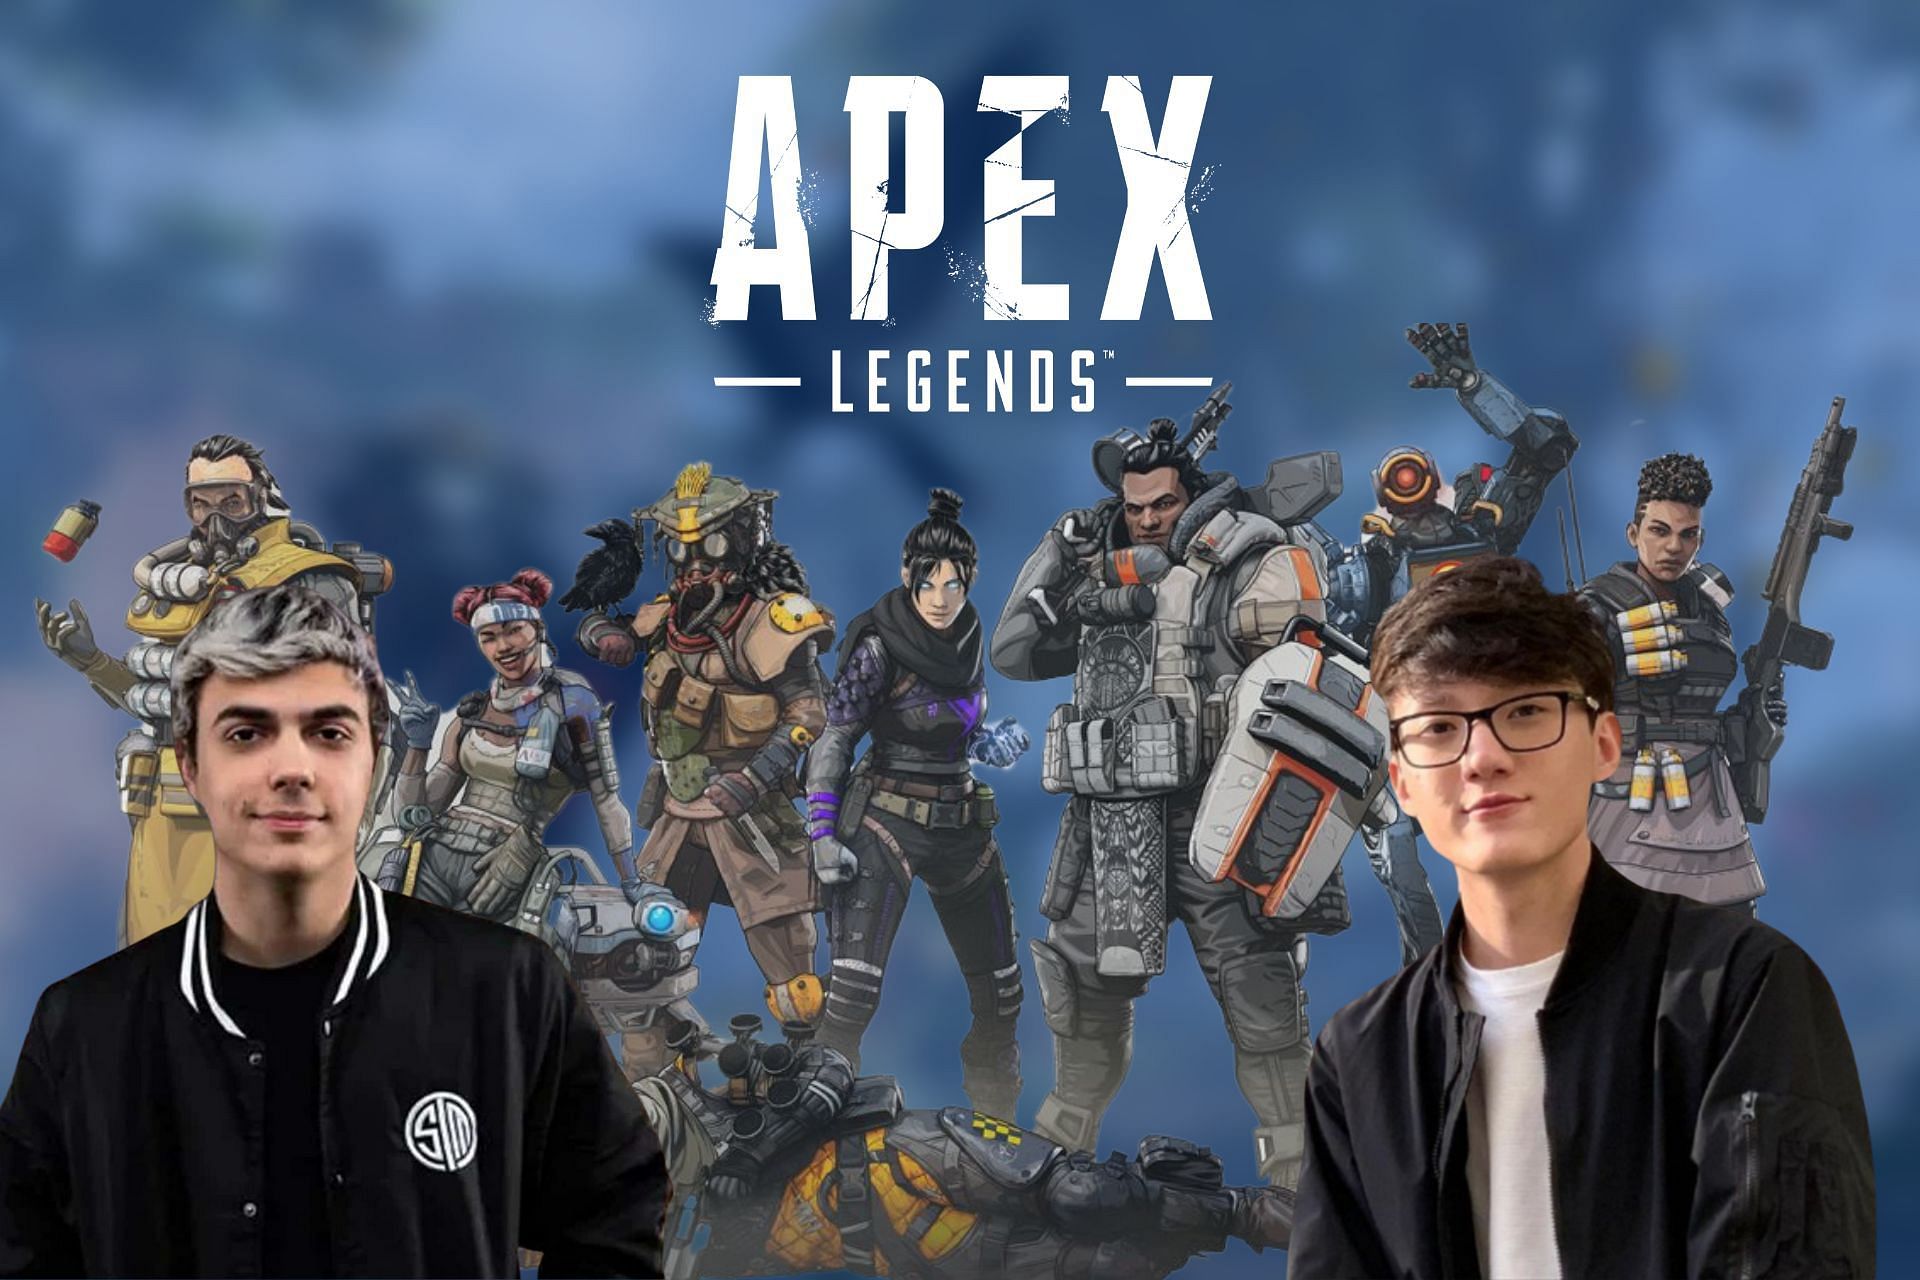 ImperialHal and iiTzTimmy are two of the most famous personalities in the Apex Legends community (Image via Sportskeeda)